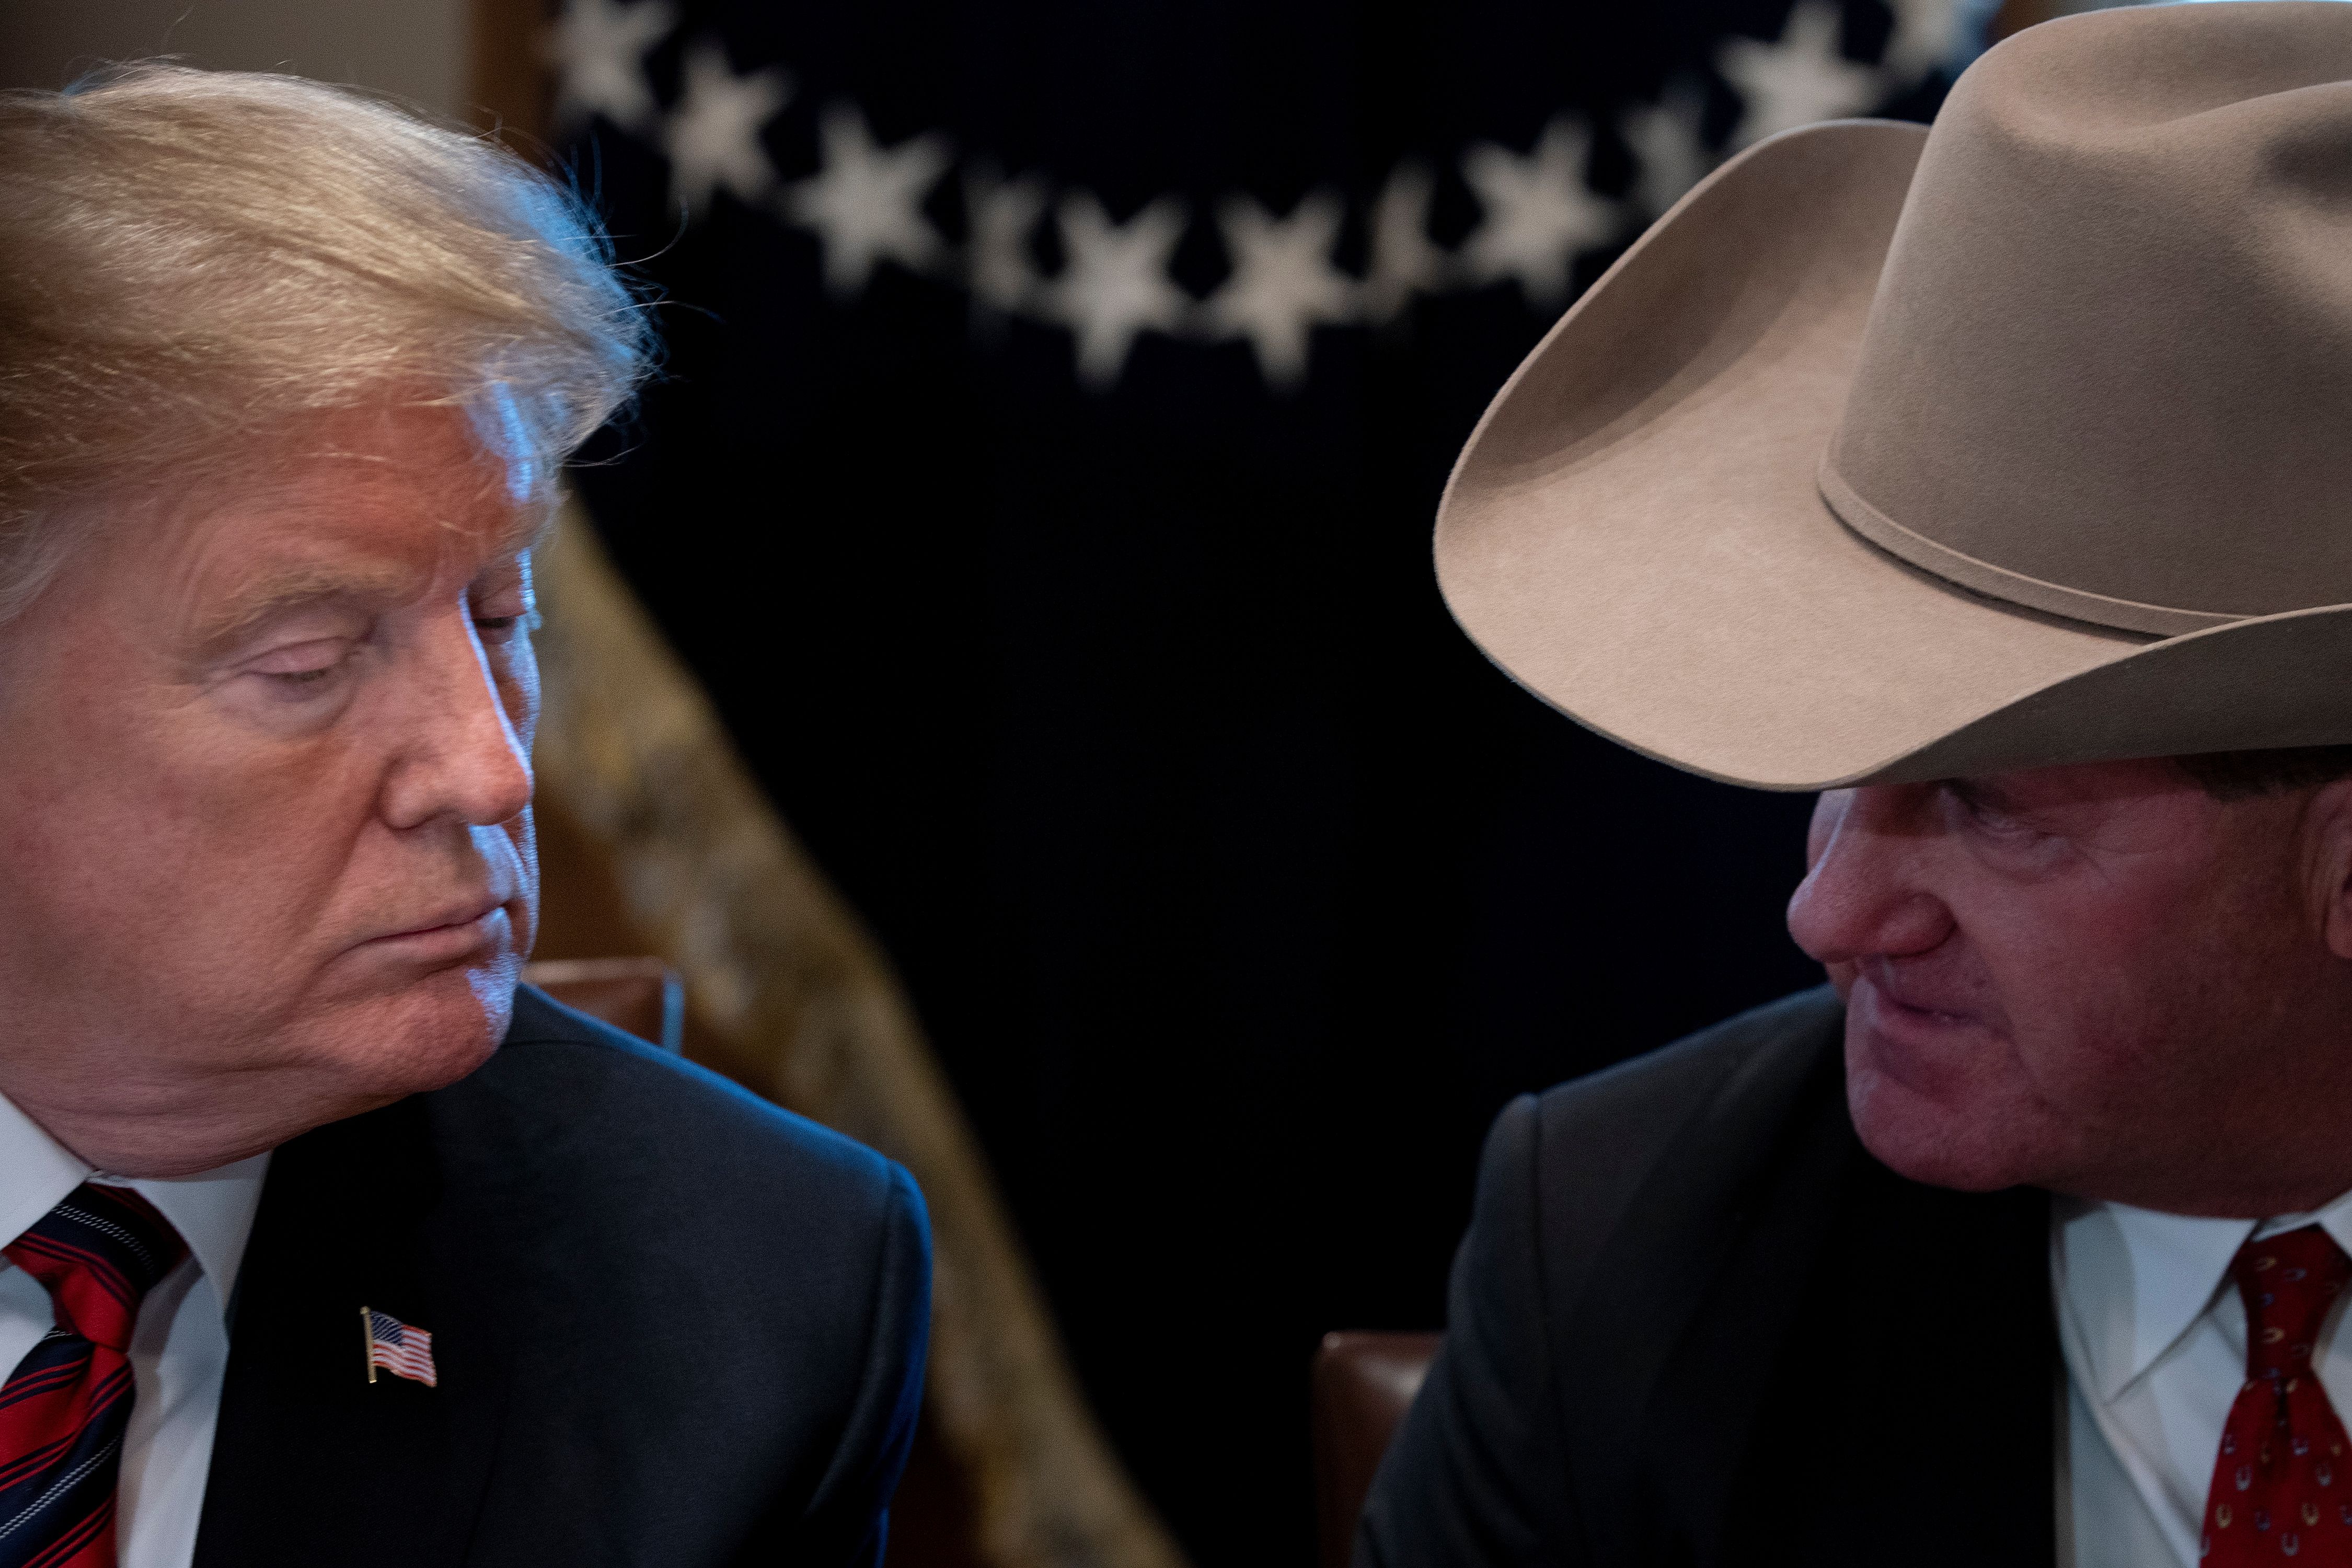 US President Donald Trump (L) listens to Jackson County Texas Sheriff A.J. Louderback during a meeting on border security in the Cabinet Room of the White House January 11, 2019 in Washington, DC. (Photo by Brendan Smialowski / AFP) (Photo credit should read BRENDAN SMIALOWSKI/AFP/Getty Images)